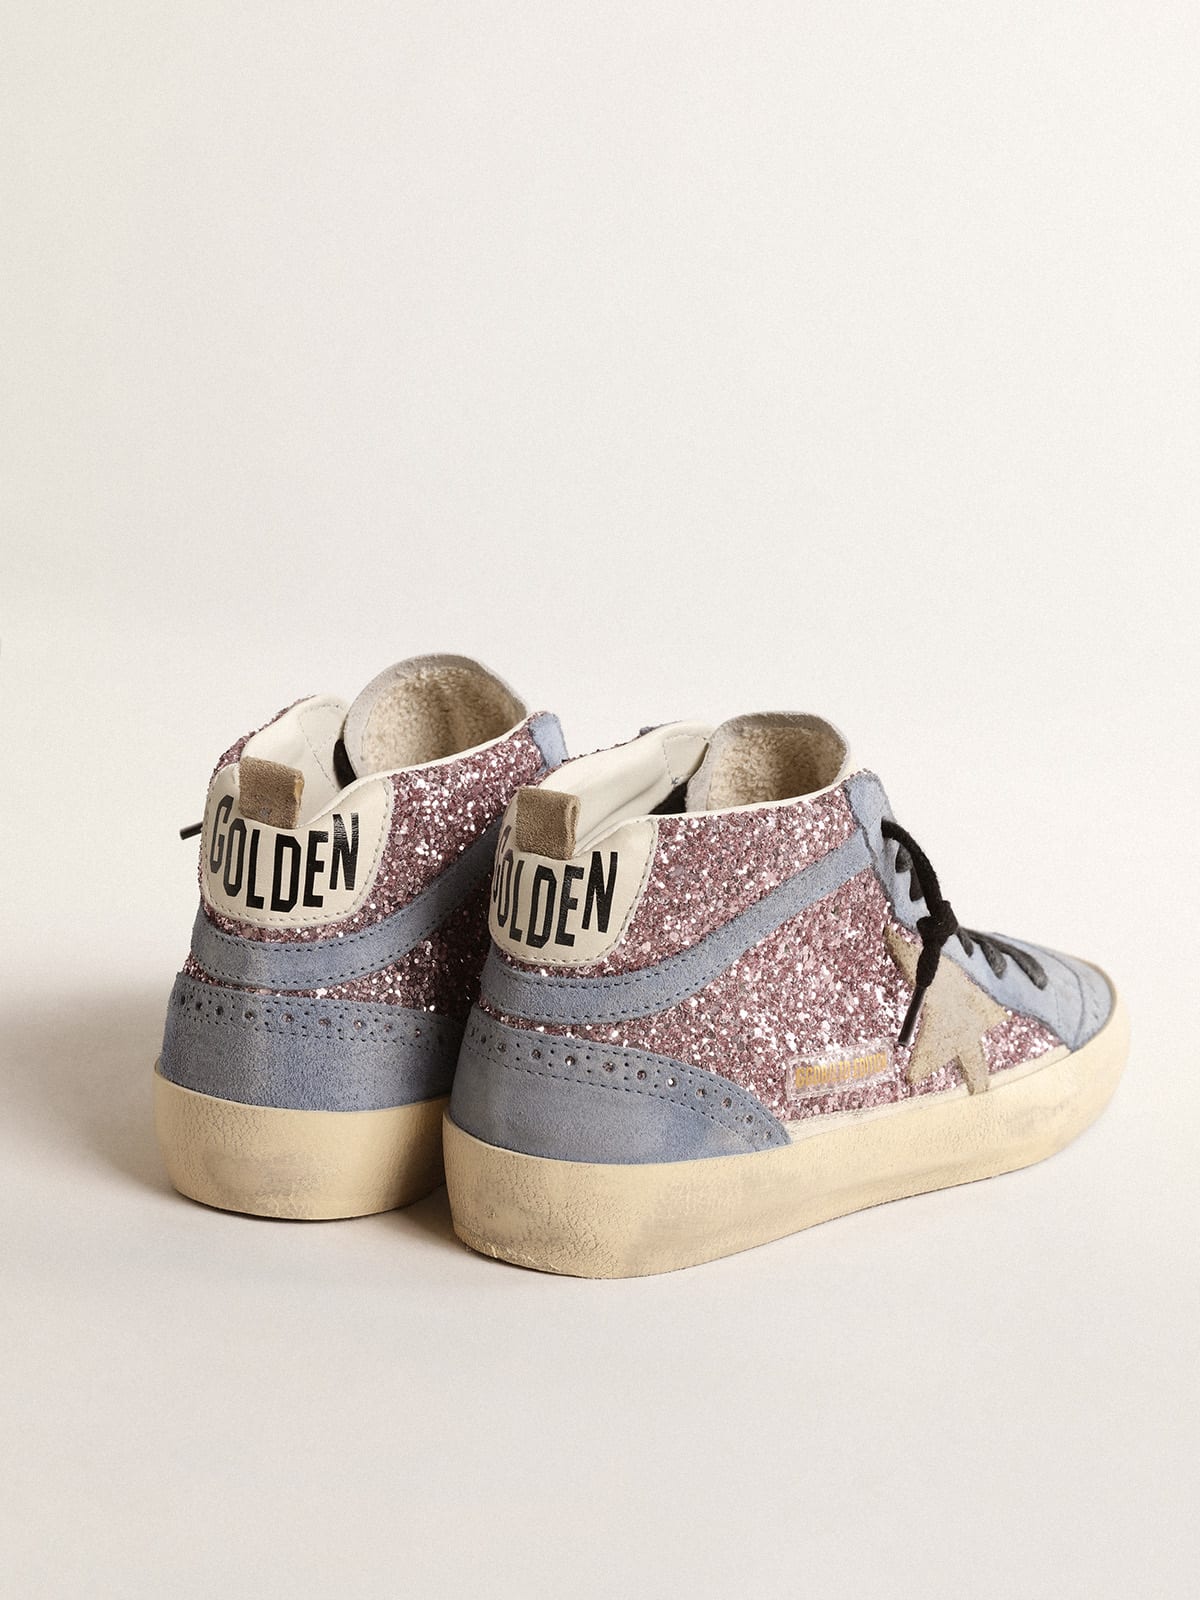 Golden Goose - Mid Star LTD in lilac glitter with light blue suede inserts in 